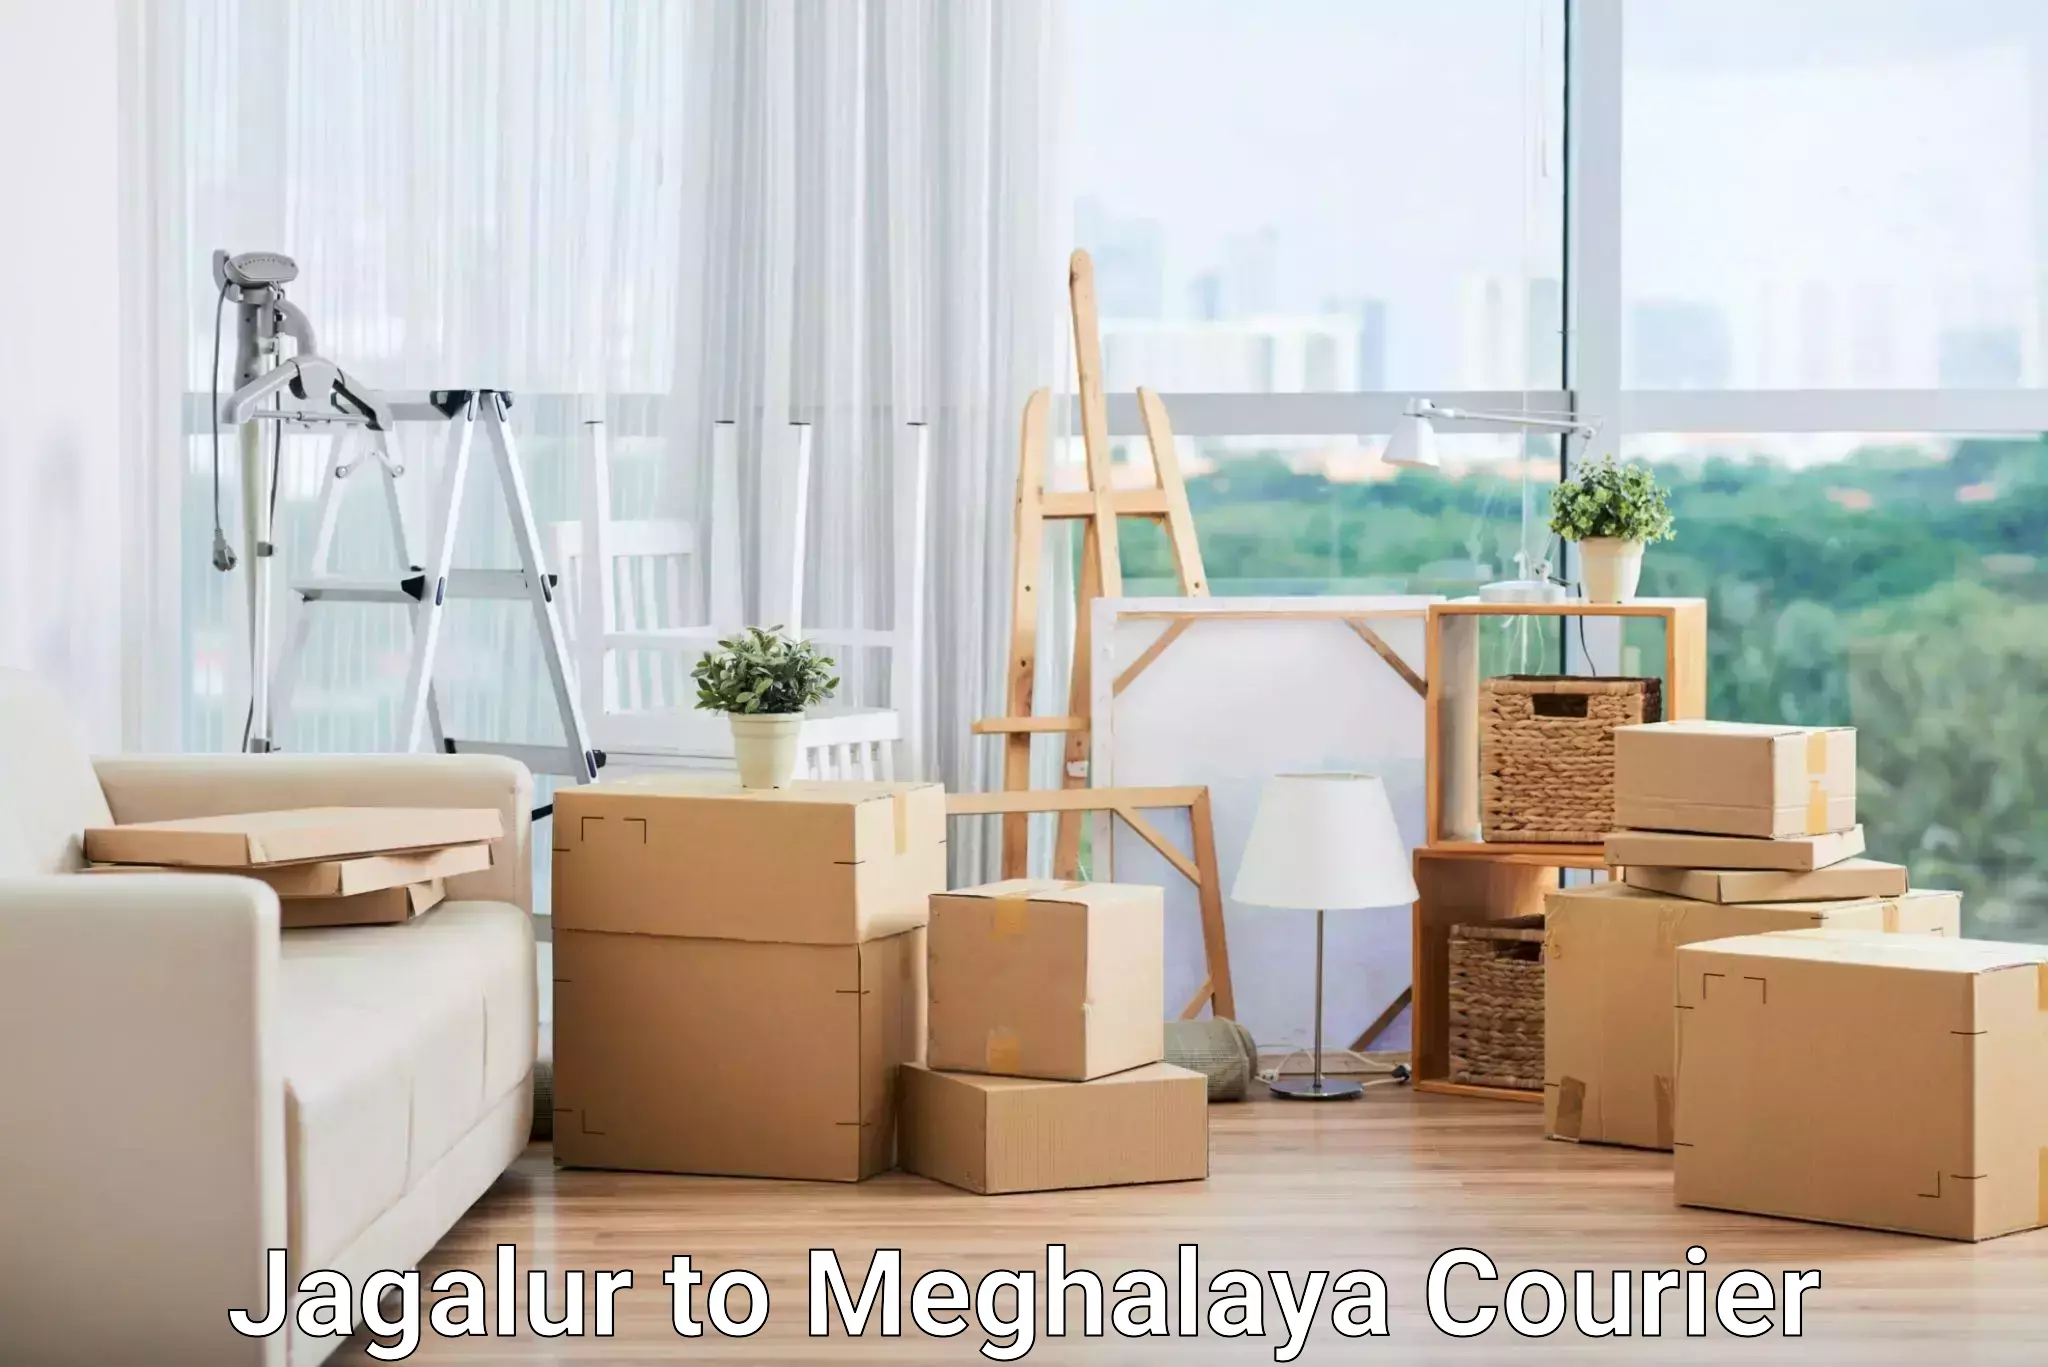 Courier service innovation in Jagalur to Garobadha